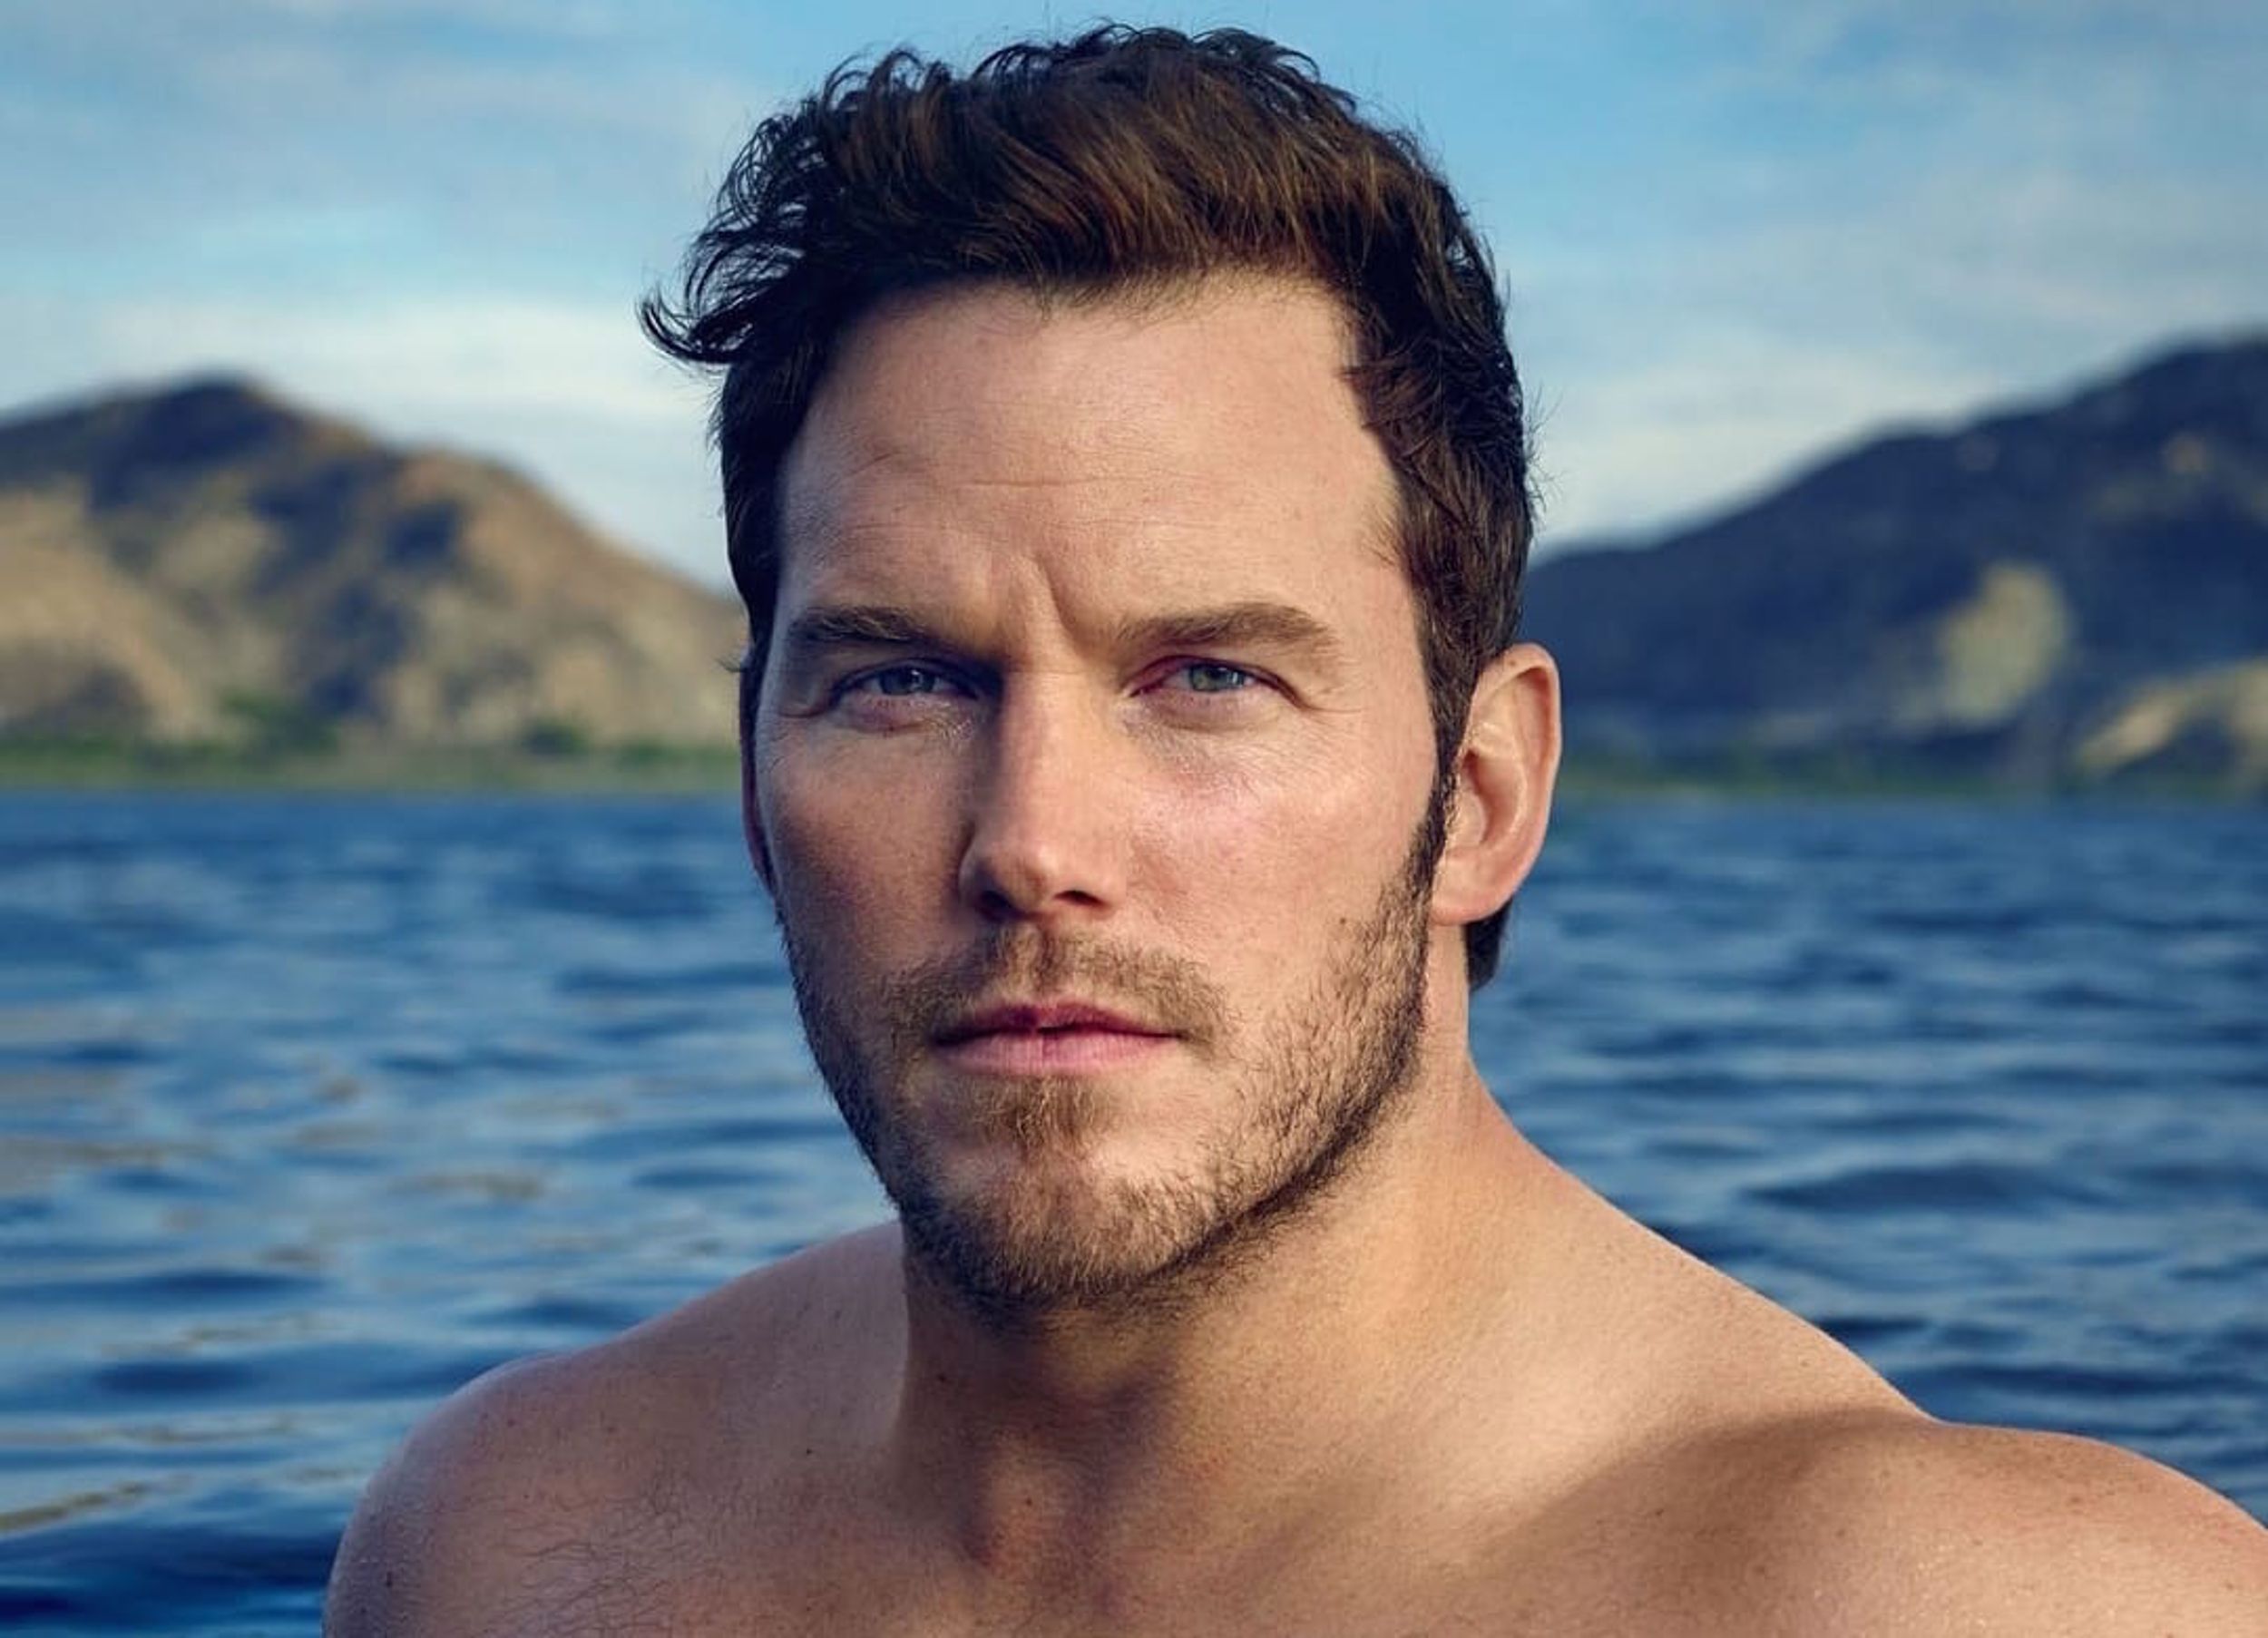 Beware Of People Who Slide Into Your DM's After A Chris Pratt Like Glow-Up